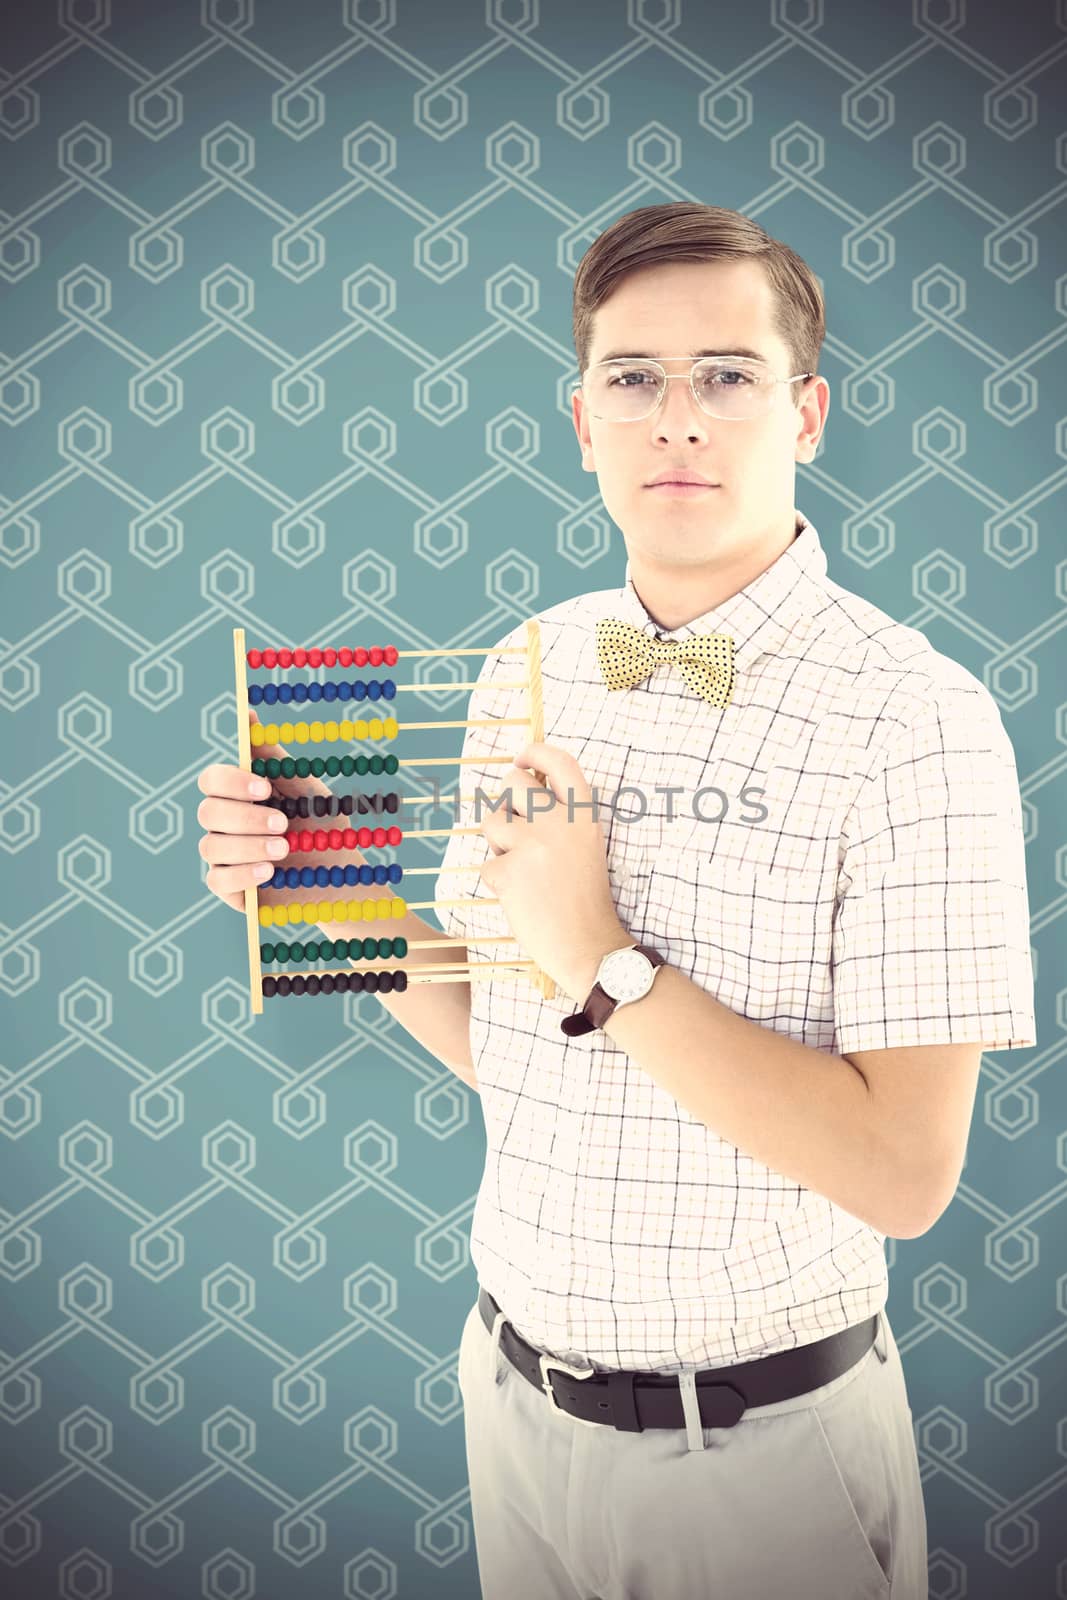 Geeky hipster holding an abacus against blue background